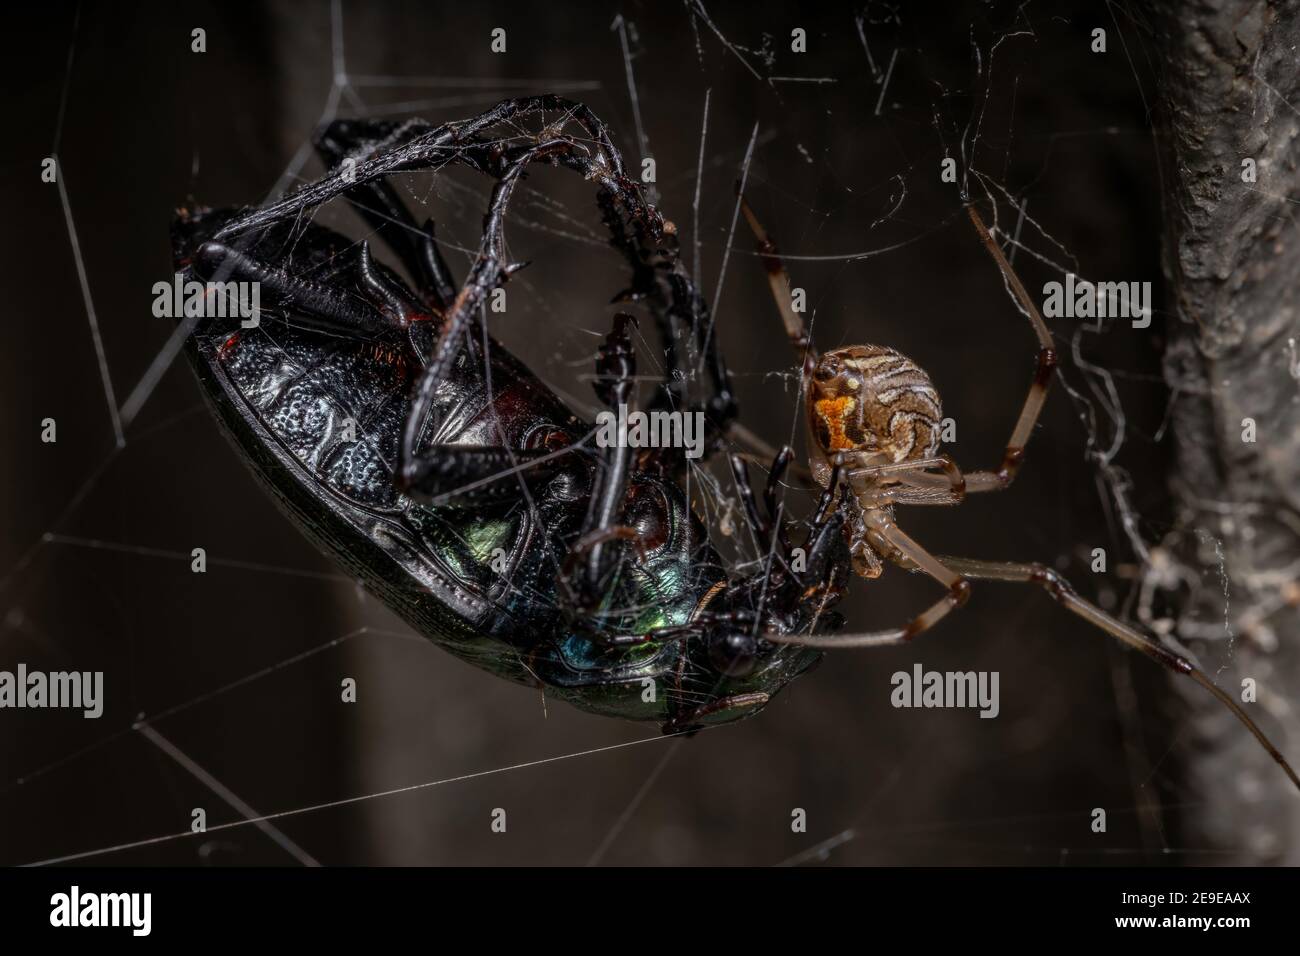 Female Adult Brown Widow of the species Latrodectus geometricus preying on a Adult Caterpillar hunter Beetle of the species Calosoma alternans Stock Photo